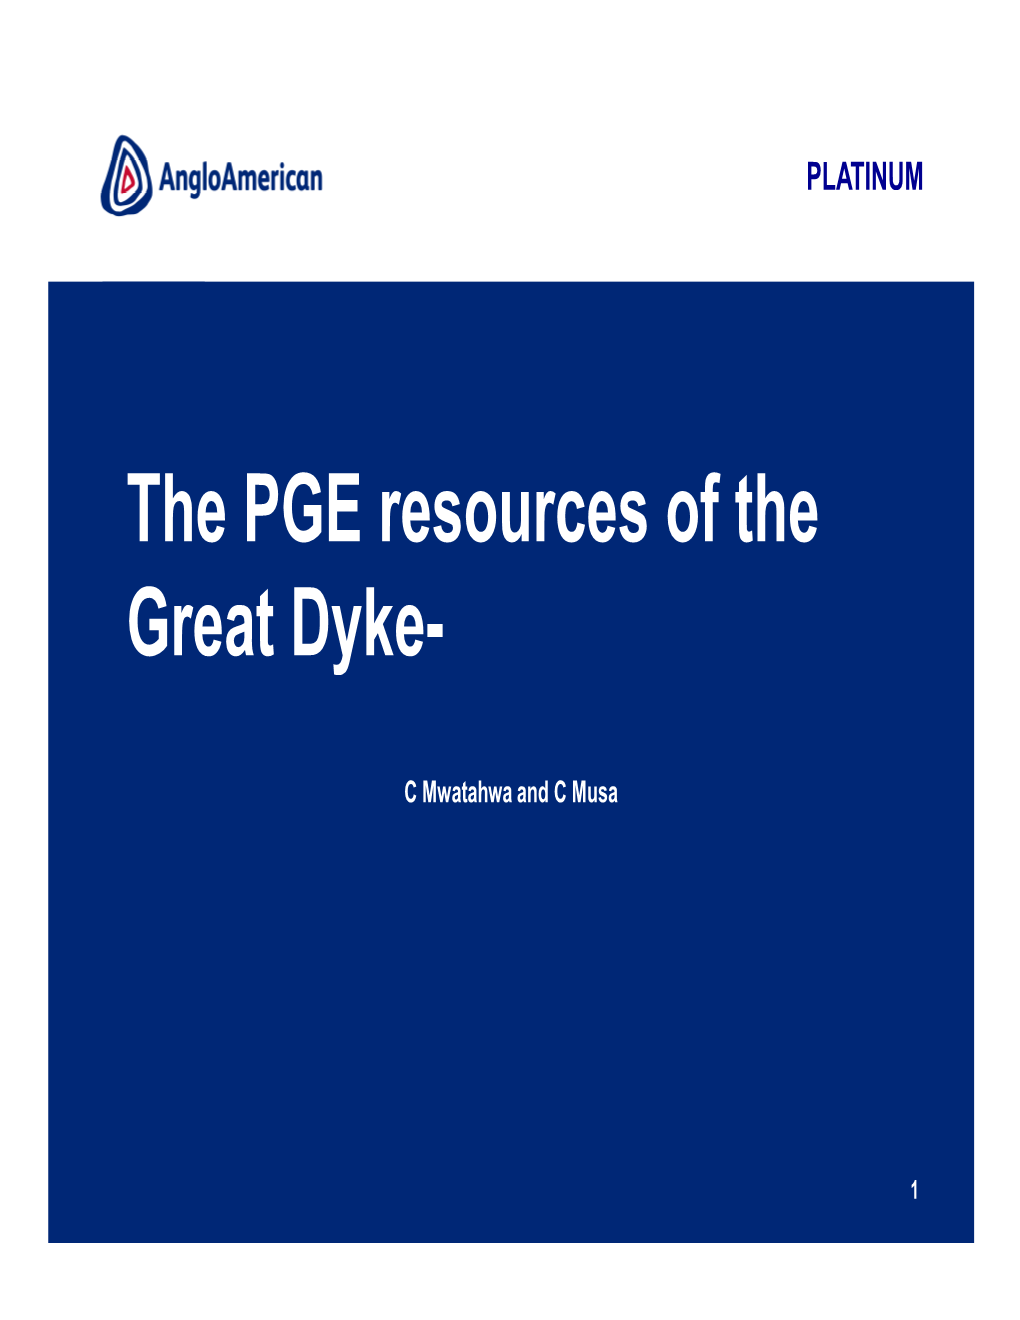 PLATINUM the PGE Resources of the Great Dyke